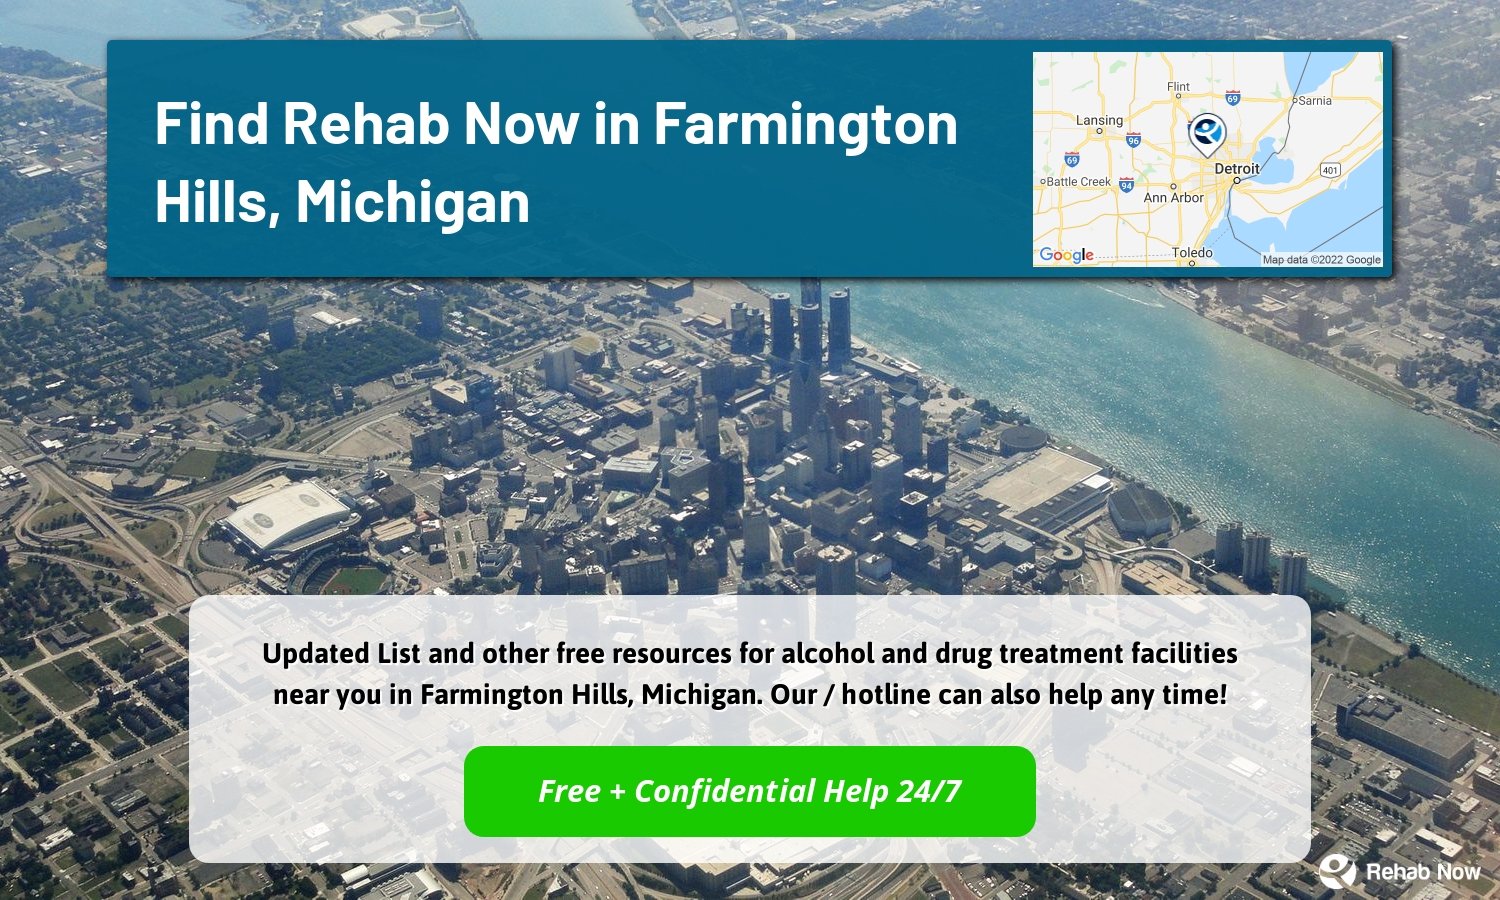  Updated List and other free resources for alcohol and drug treatment facilities near you in Farmington Hills, Michigan. Our / hotline can also help any time!